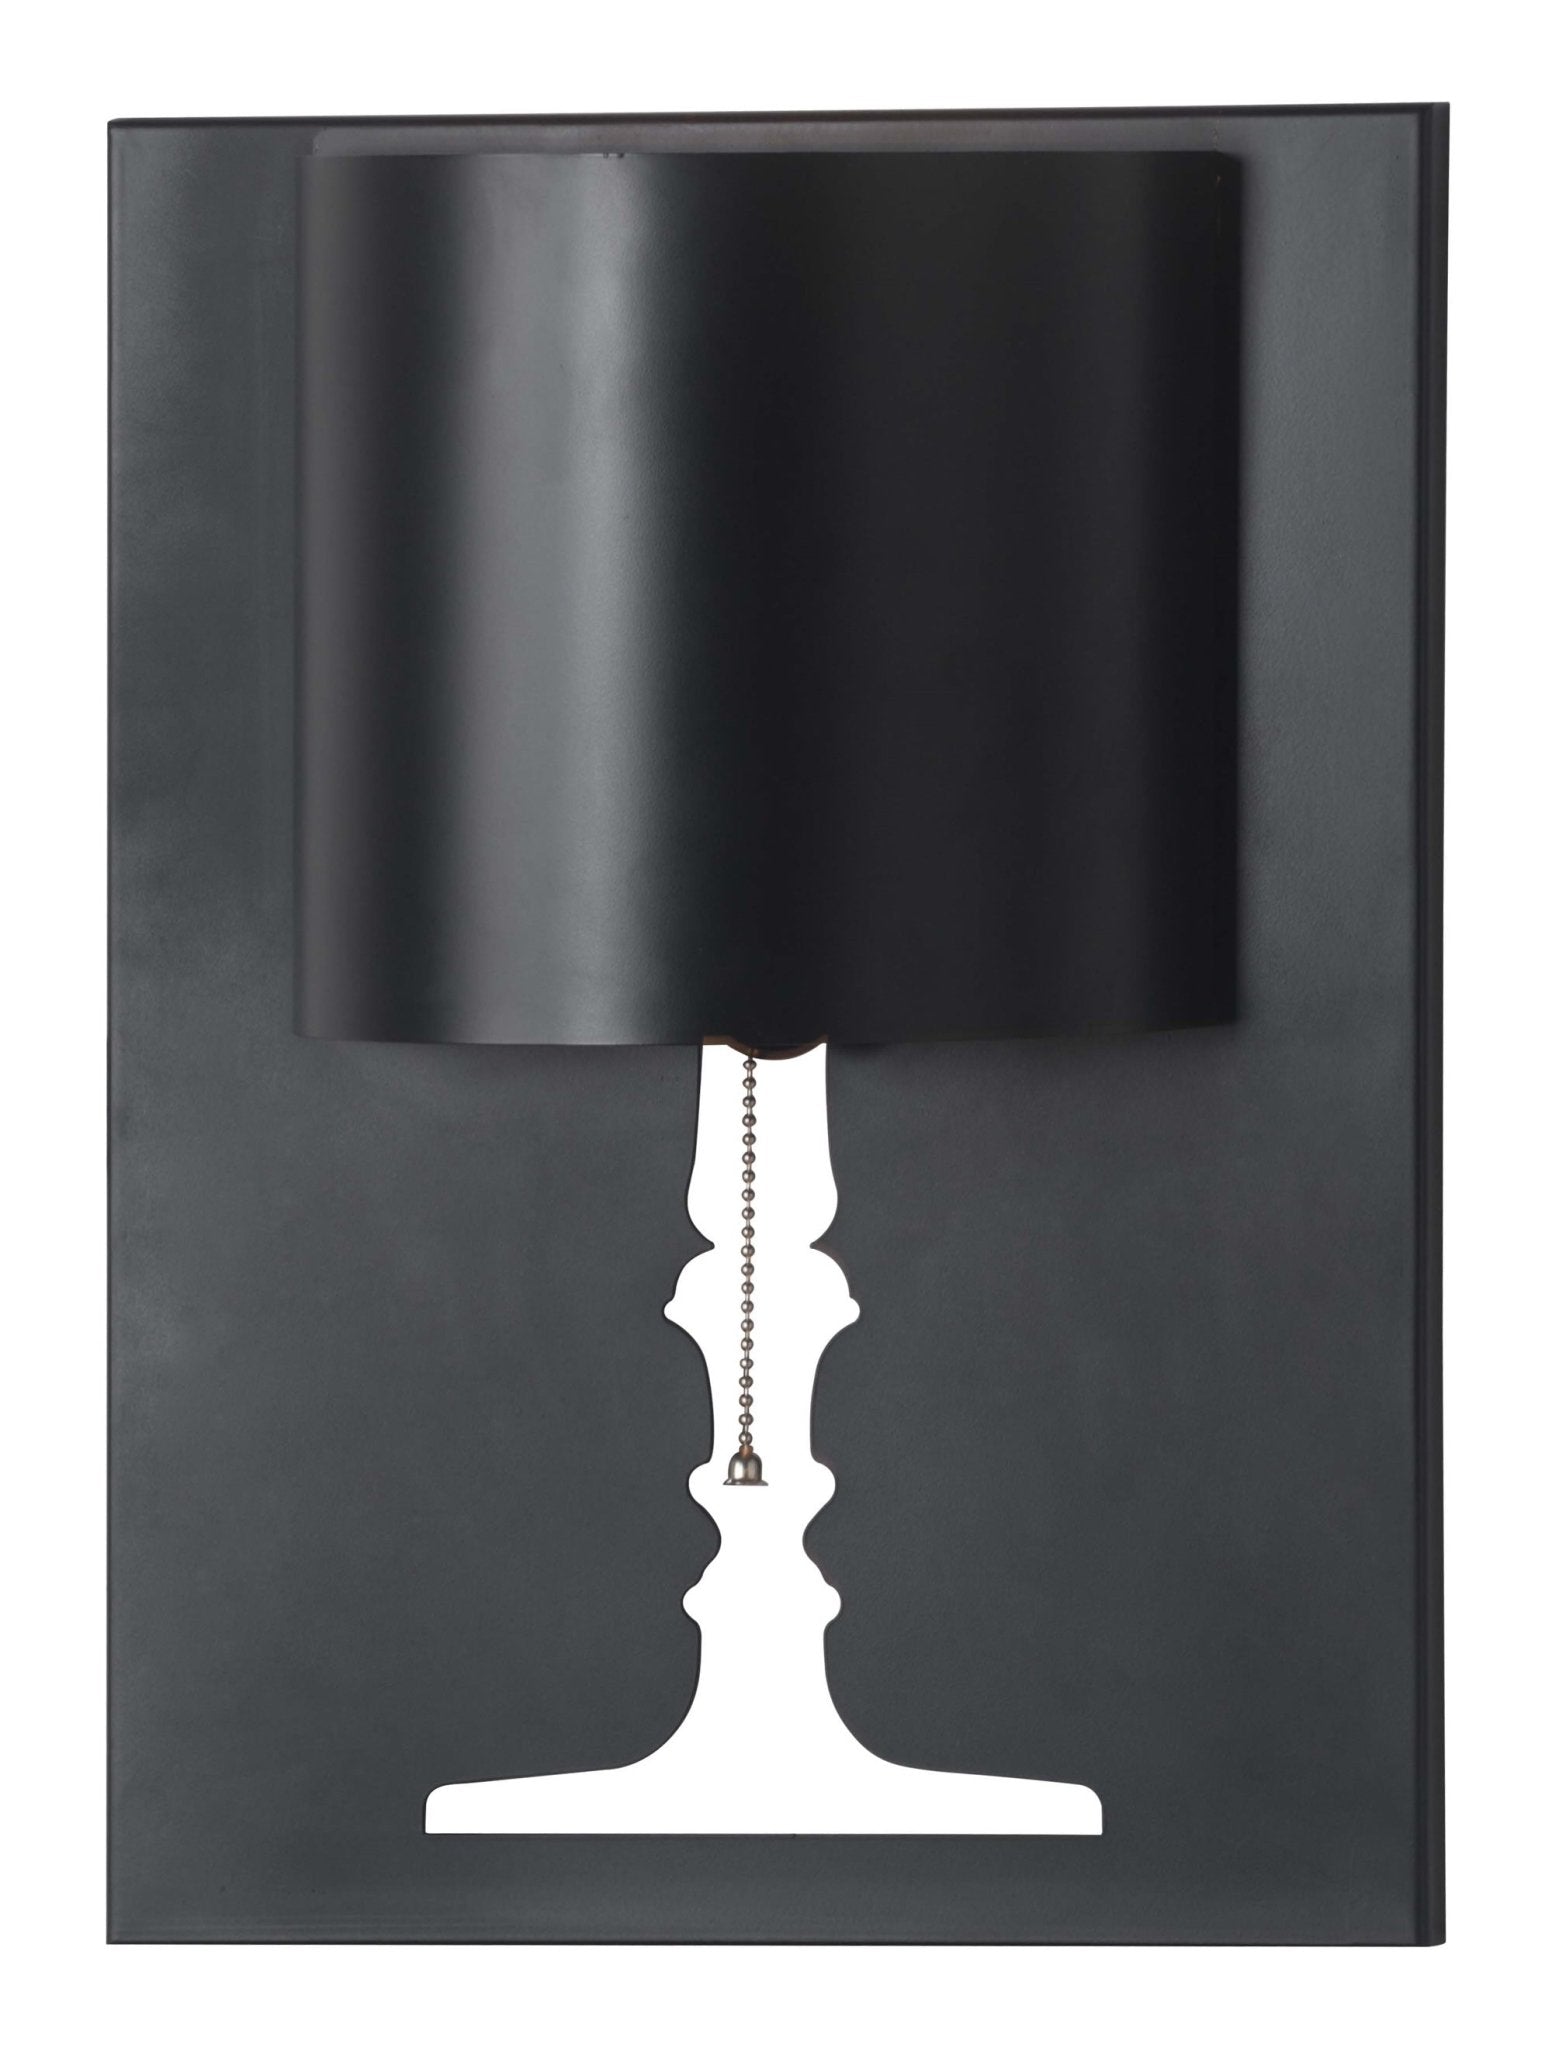 Black-and-White-Silhouette-Wall-Lamp-Wall-Lighting